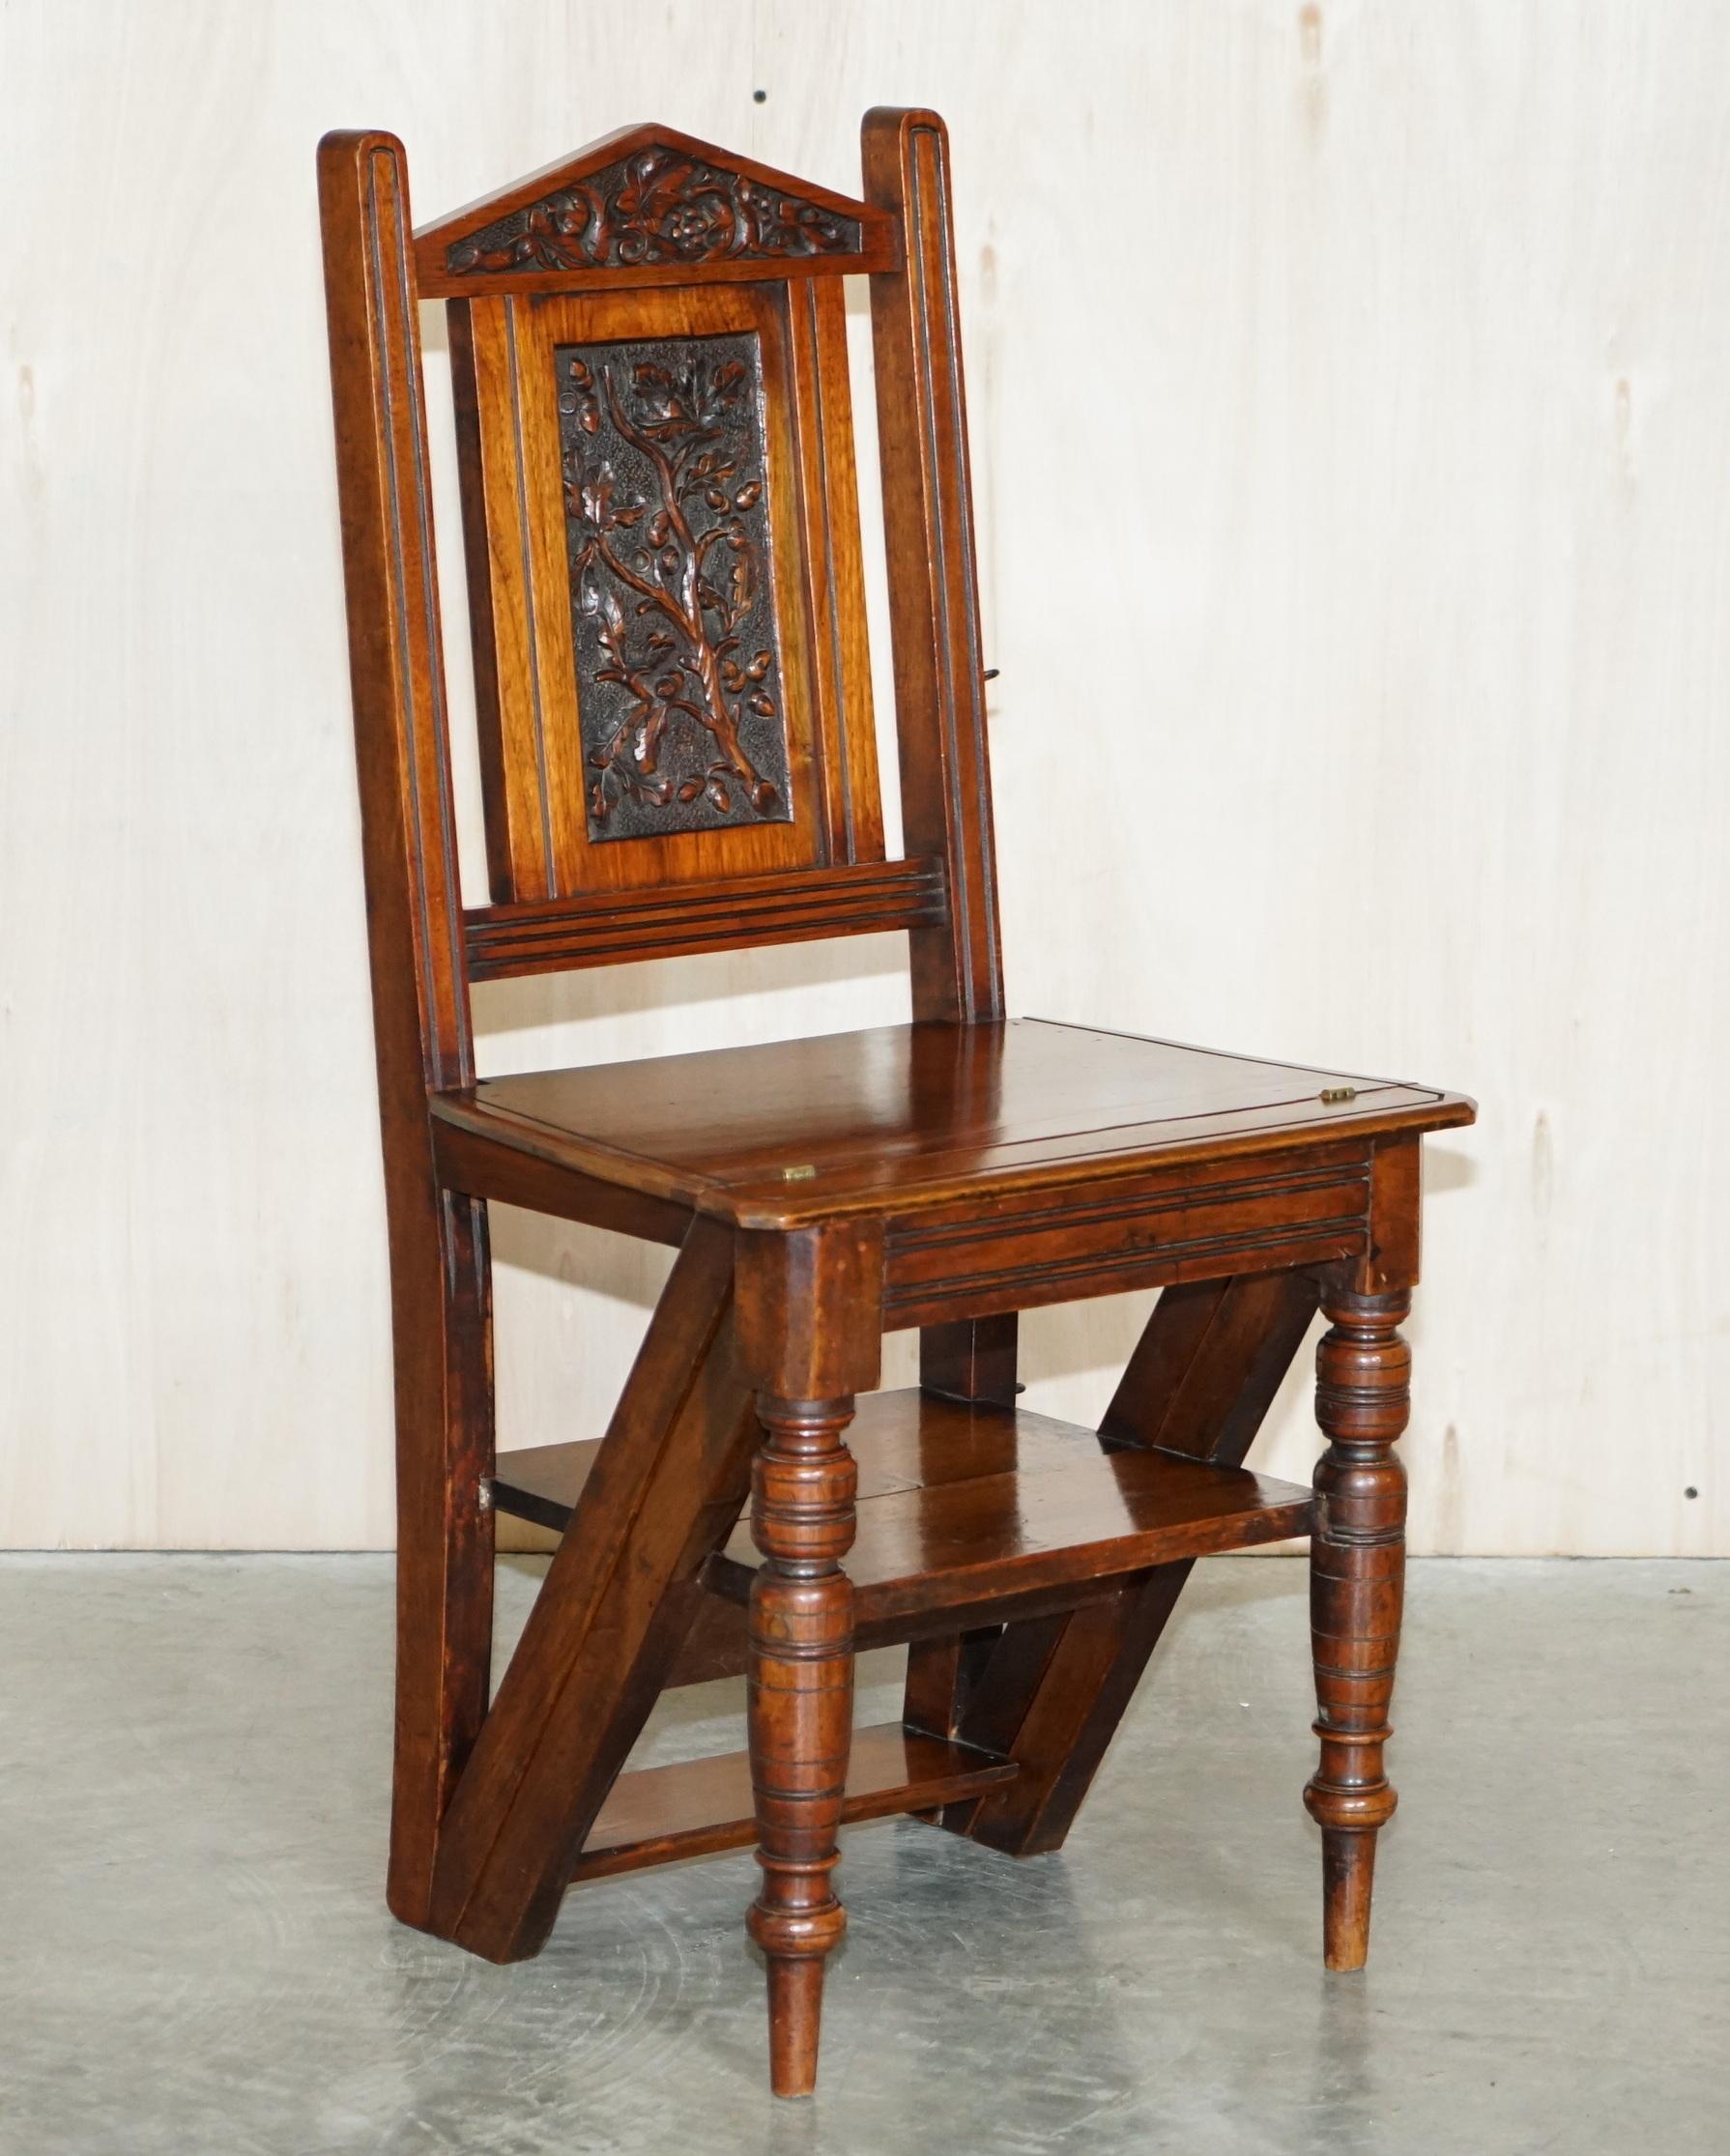 We are delighted to offer this lovely antique Arts & Crafts Victorian metamorphic library steps chair in oak 

A very charming and highly collectable piece, designed as an at home library steps and reading chair, these are used to add a sense of